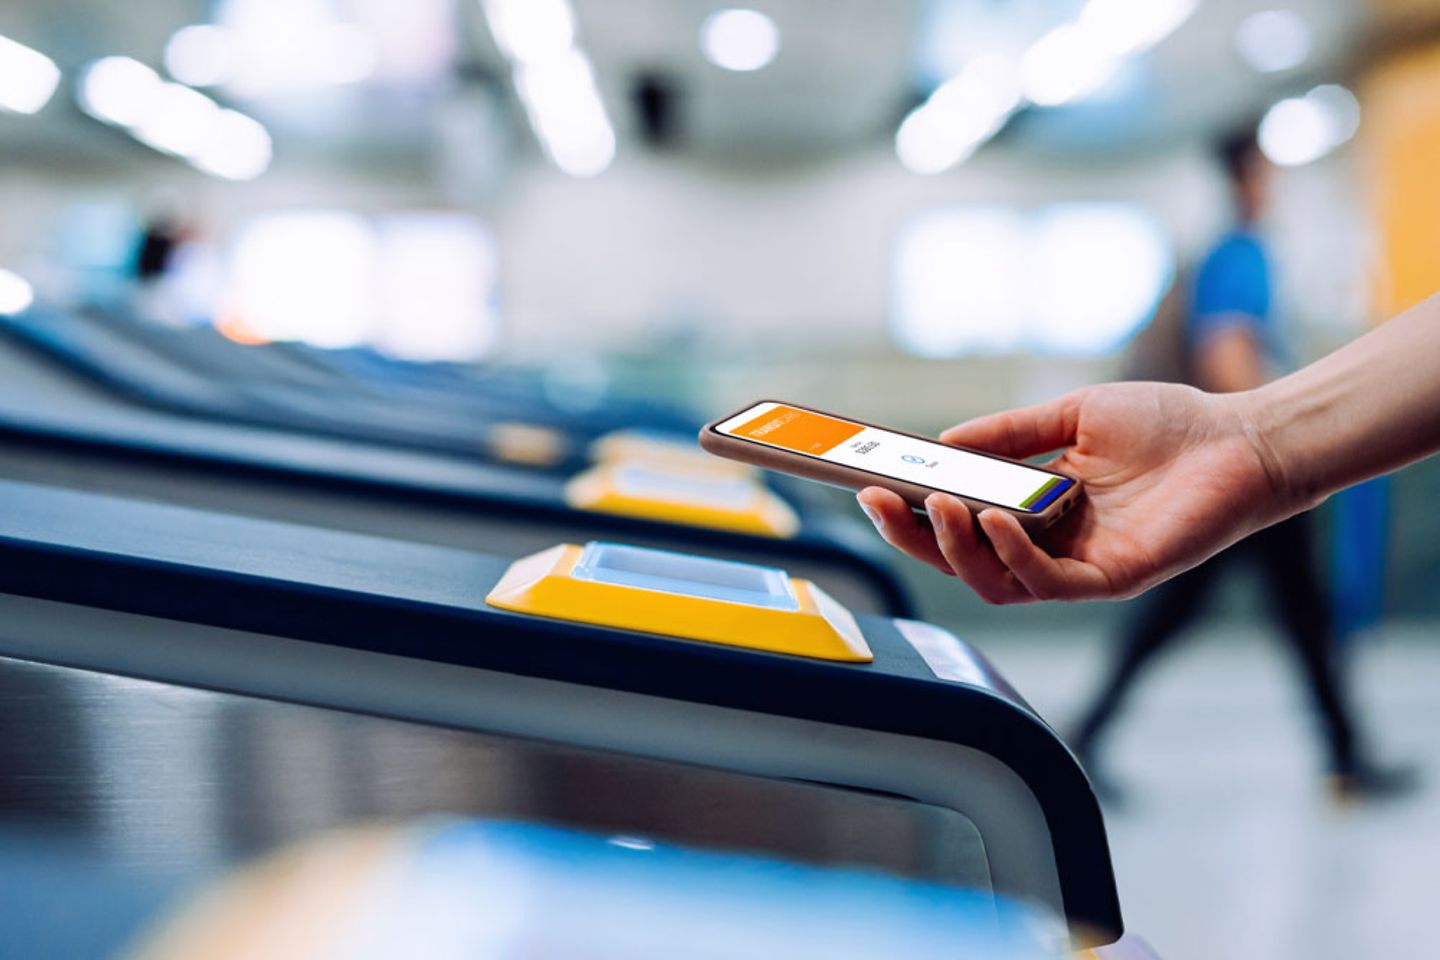 contactless payment for subway ticket via smartphone